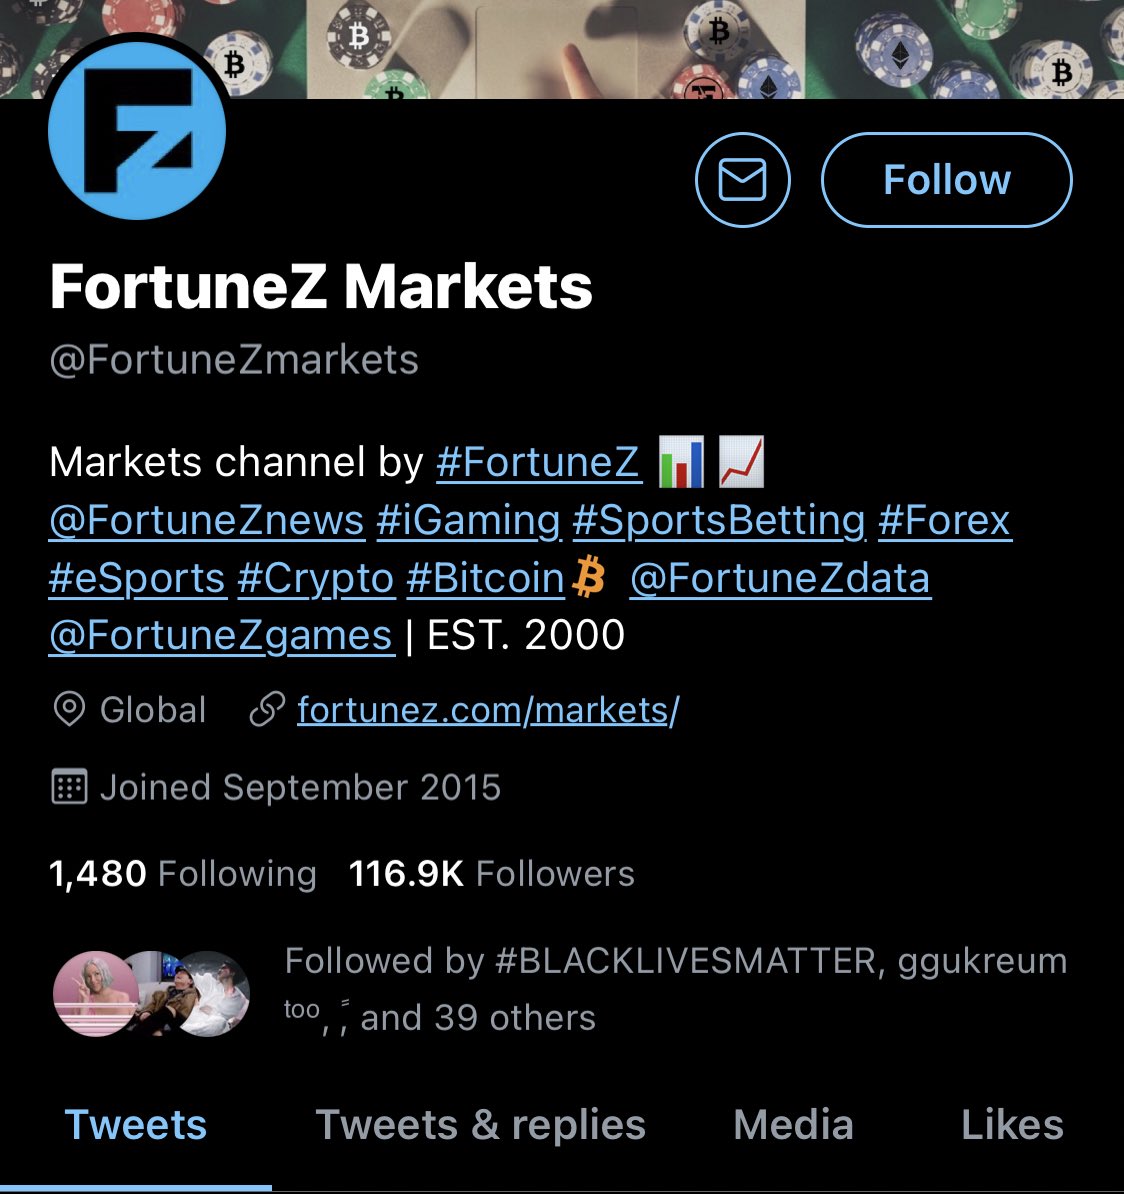 Also I know someone posted about this already, but a lot of armys are still following this account. They were a big army account that has since sold their account to someone else. Feel free to unfollow them!  @FortuneZmarkets